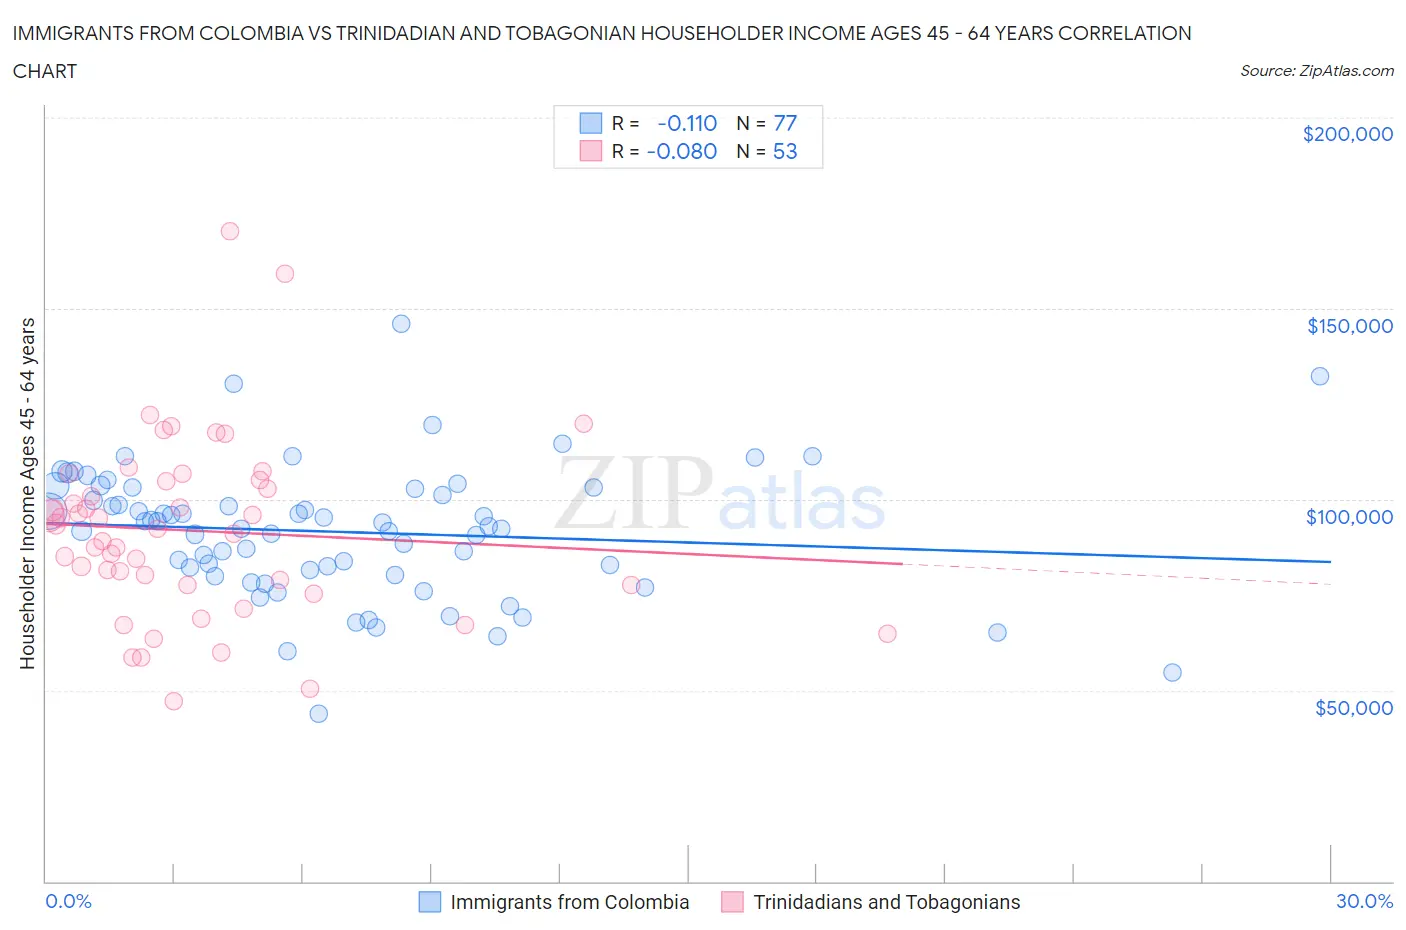 Immigrants from Colombia vs Trinidadian and Tobagonian Householder Income Ages 45 - 64 years